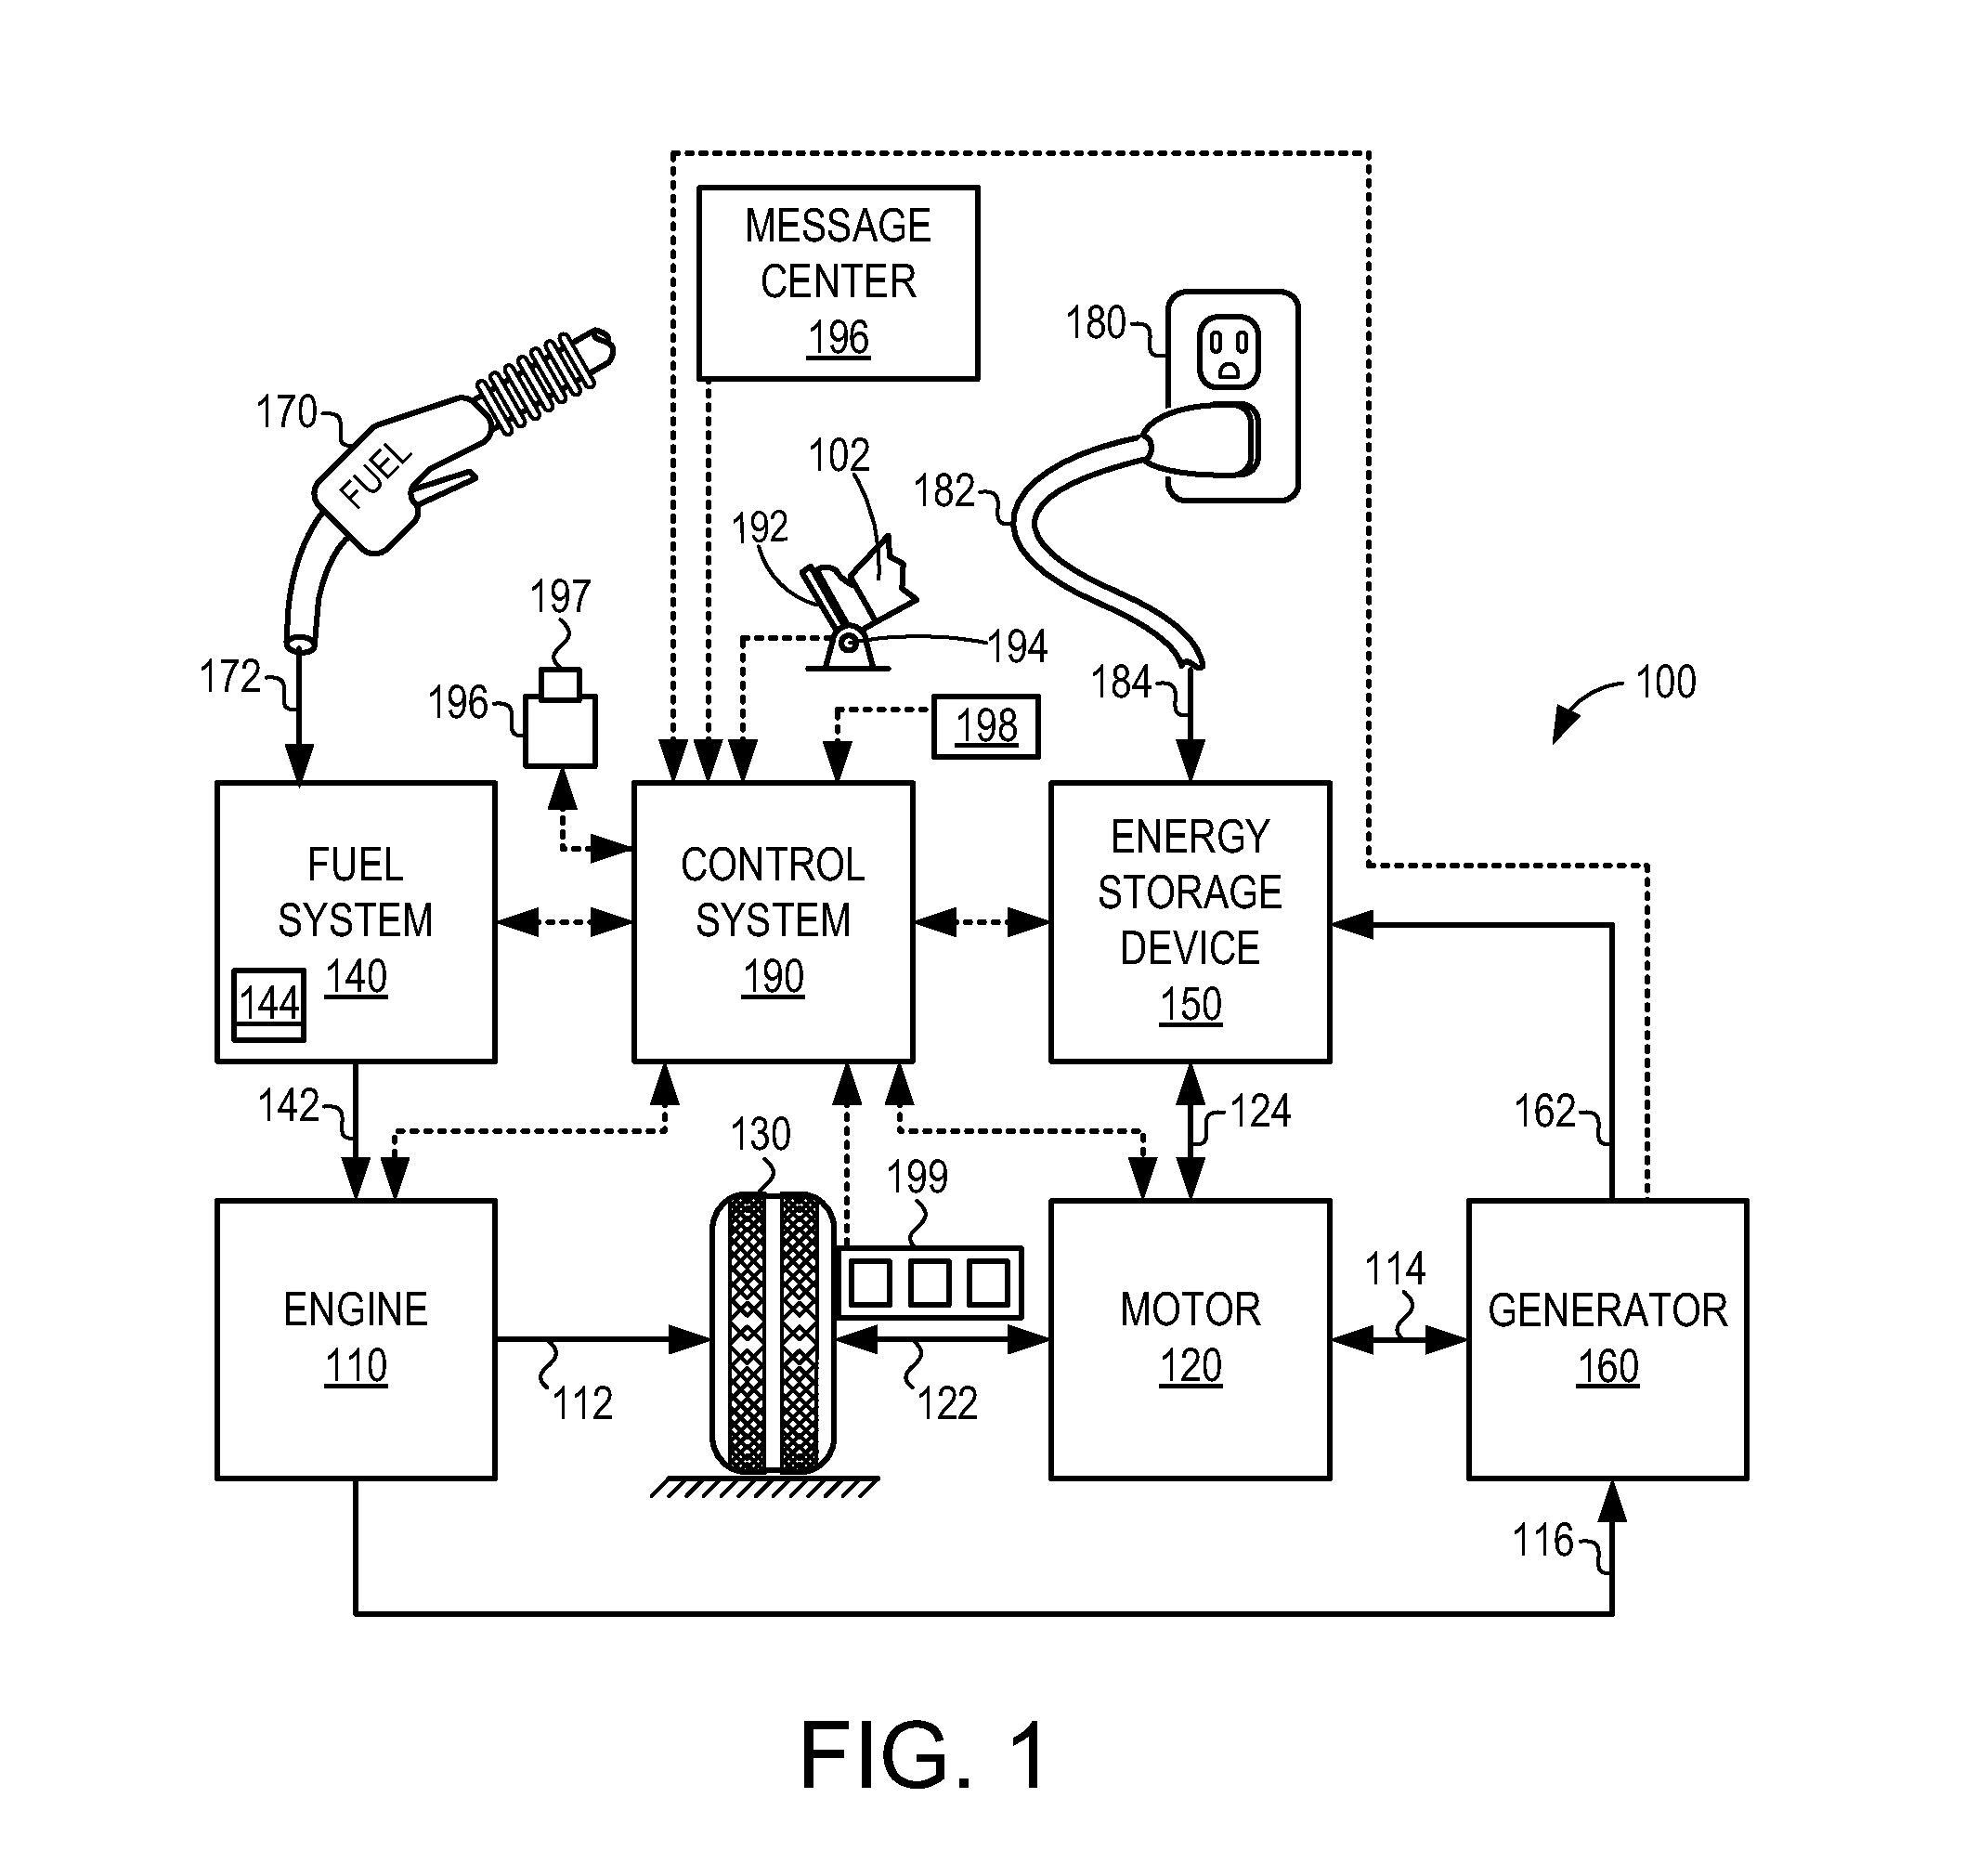 Systems and methods for reducing bleed emissions